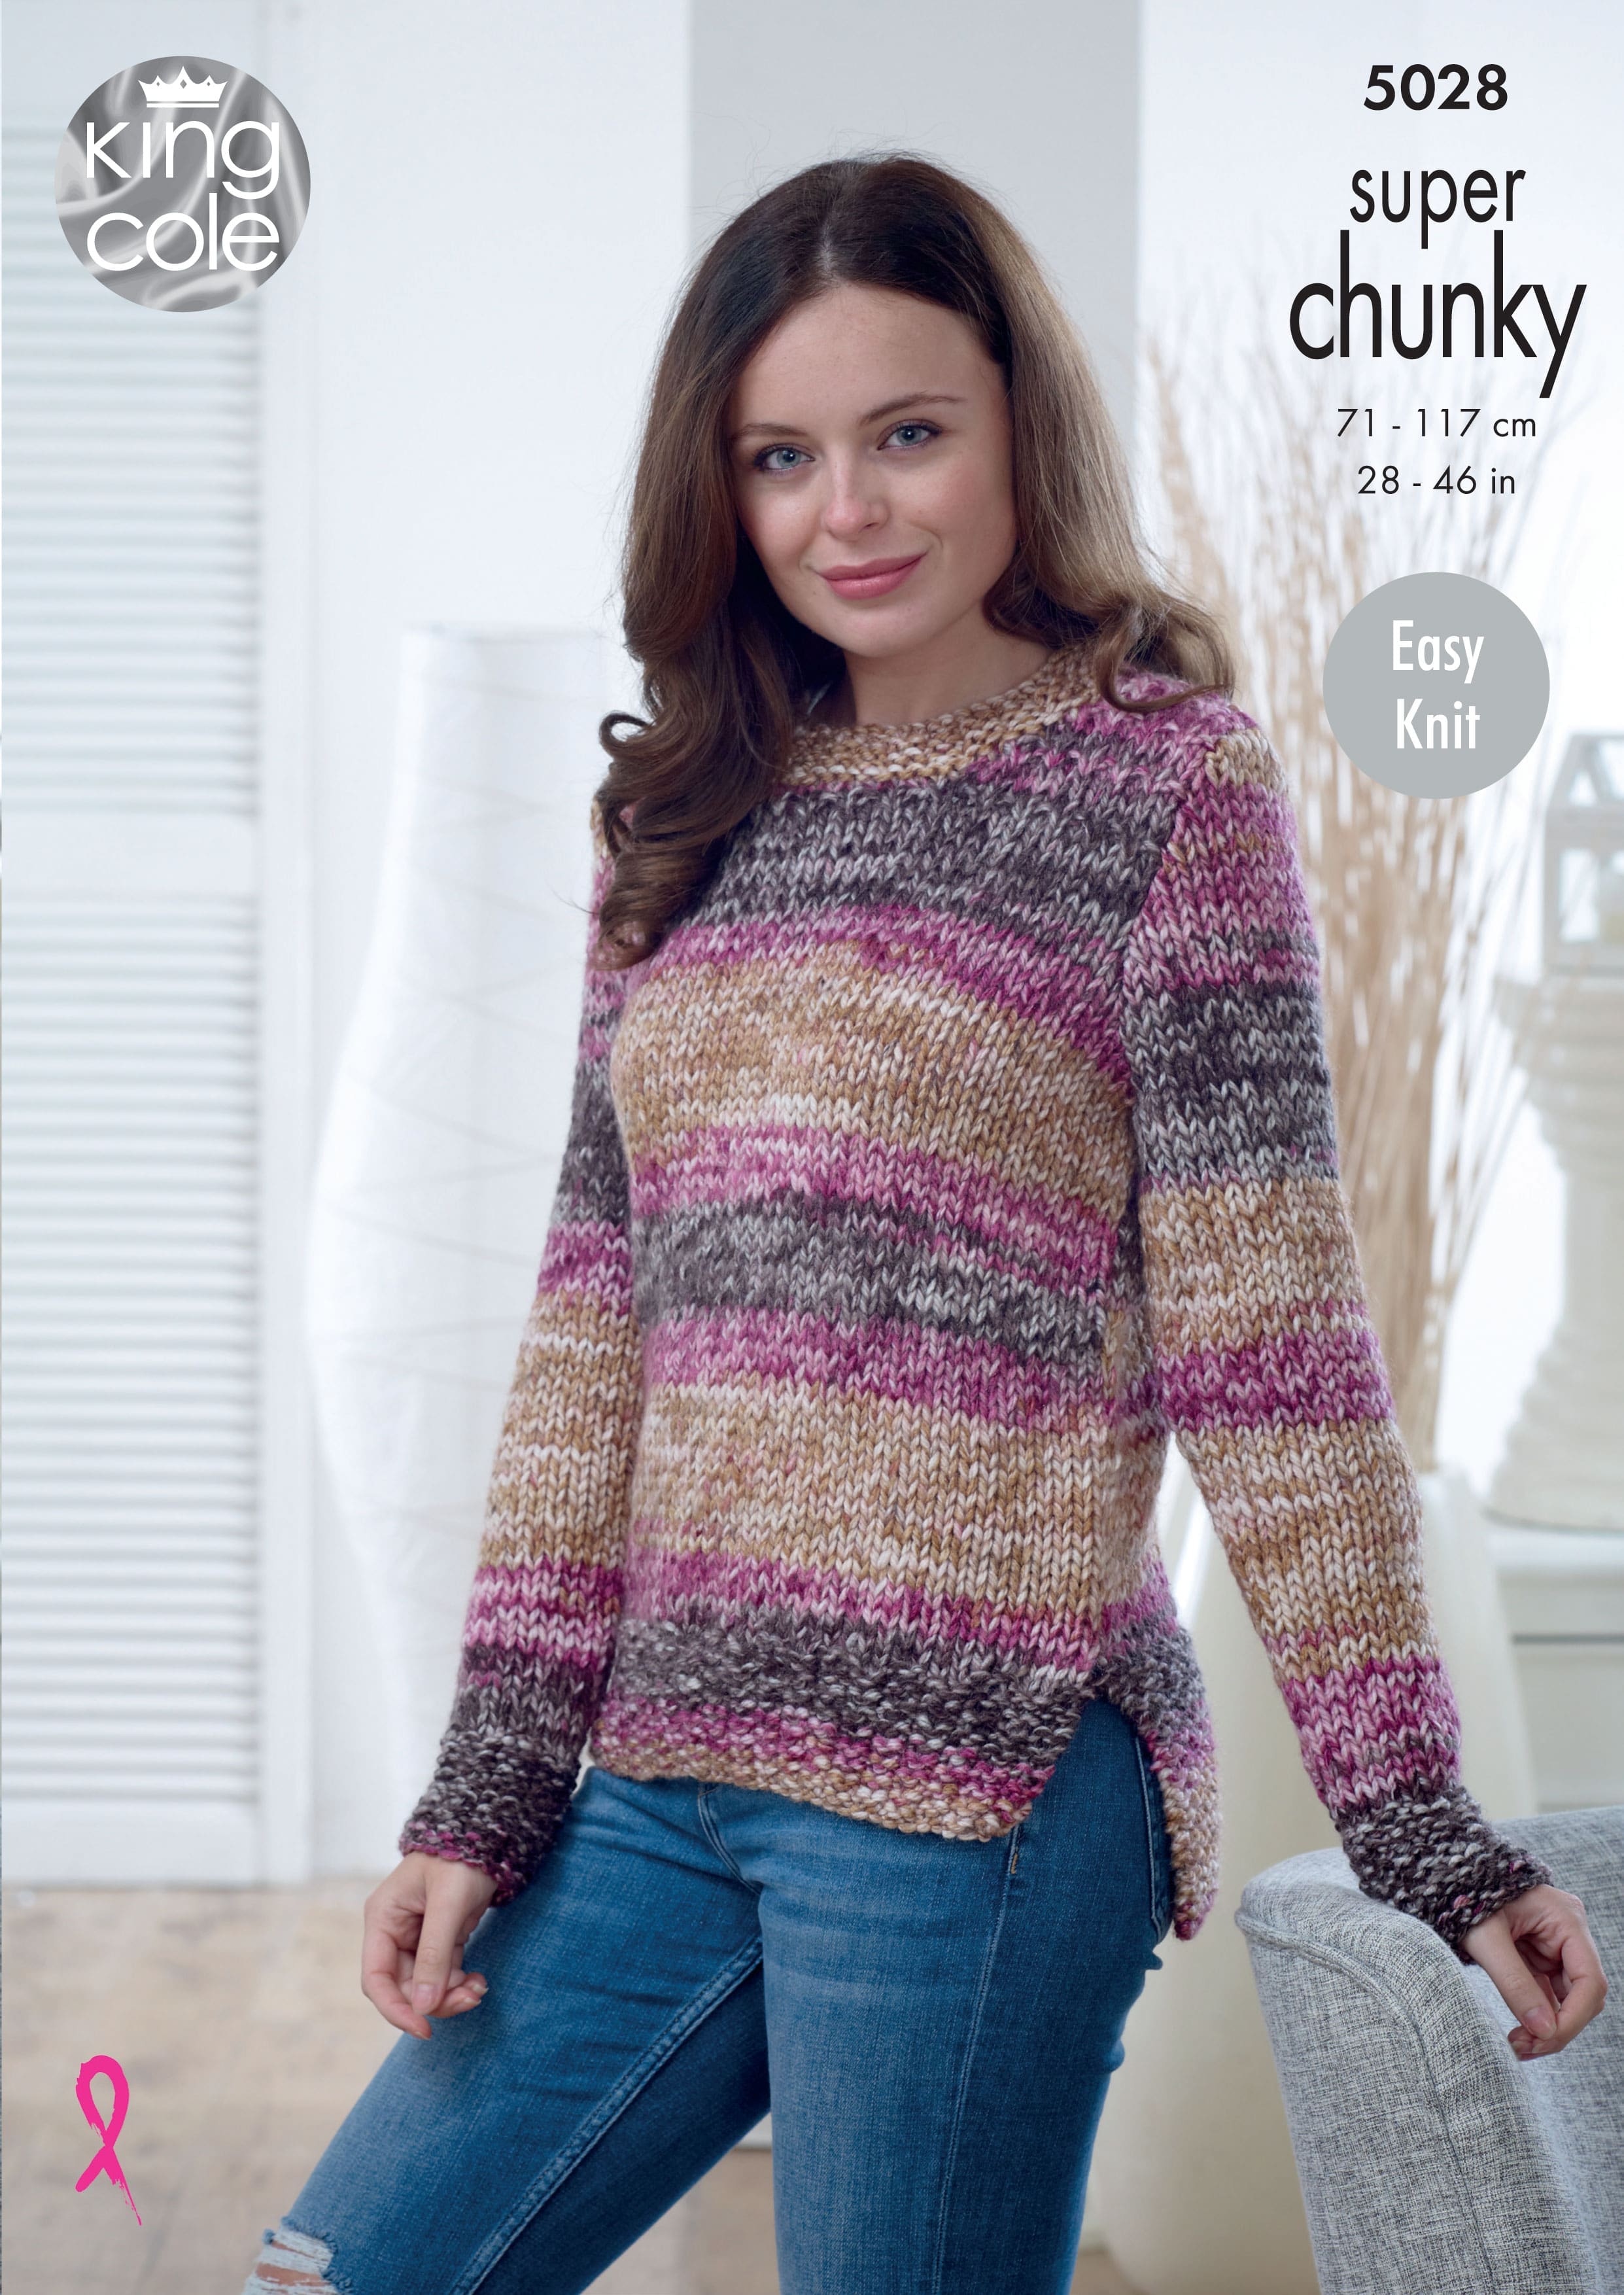 Easy to Follow Sweater & Cardigan Knitted in Big Value Super Chunky